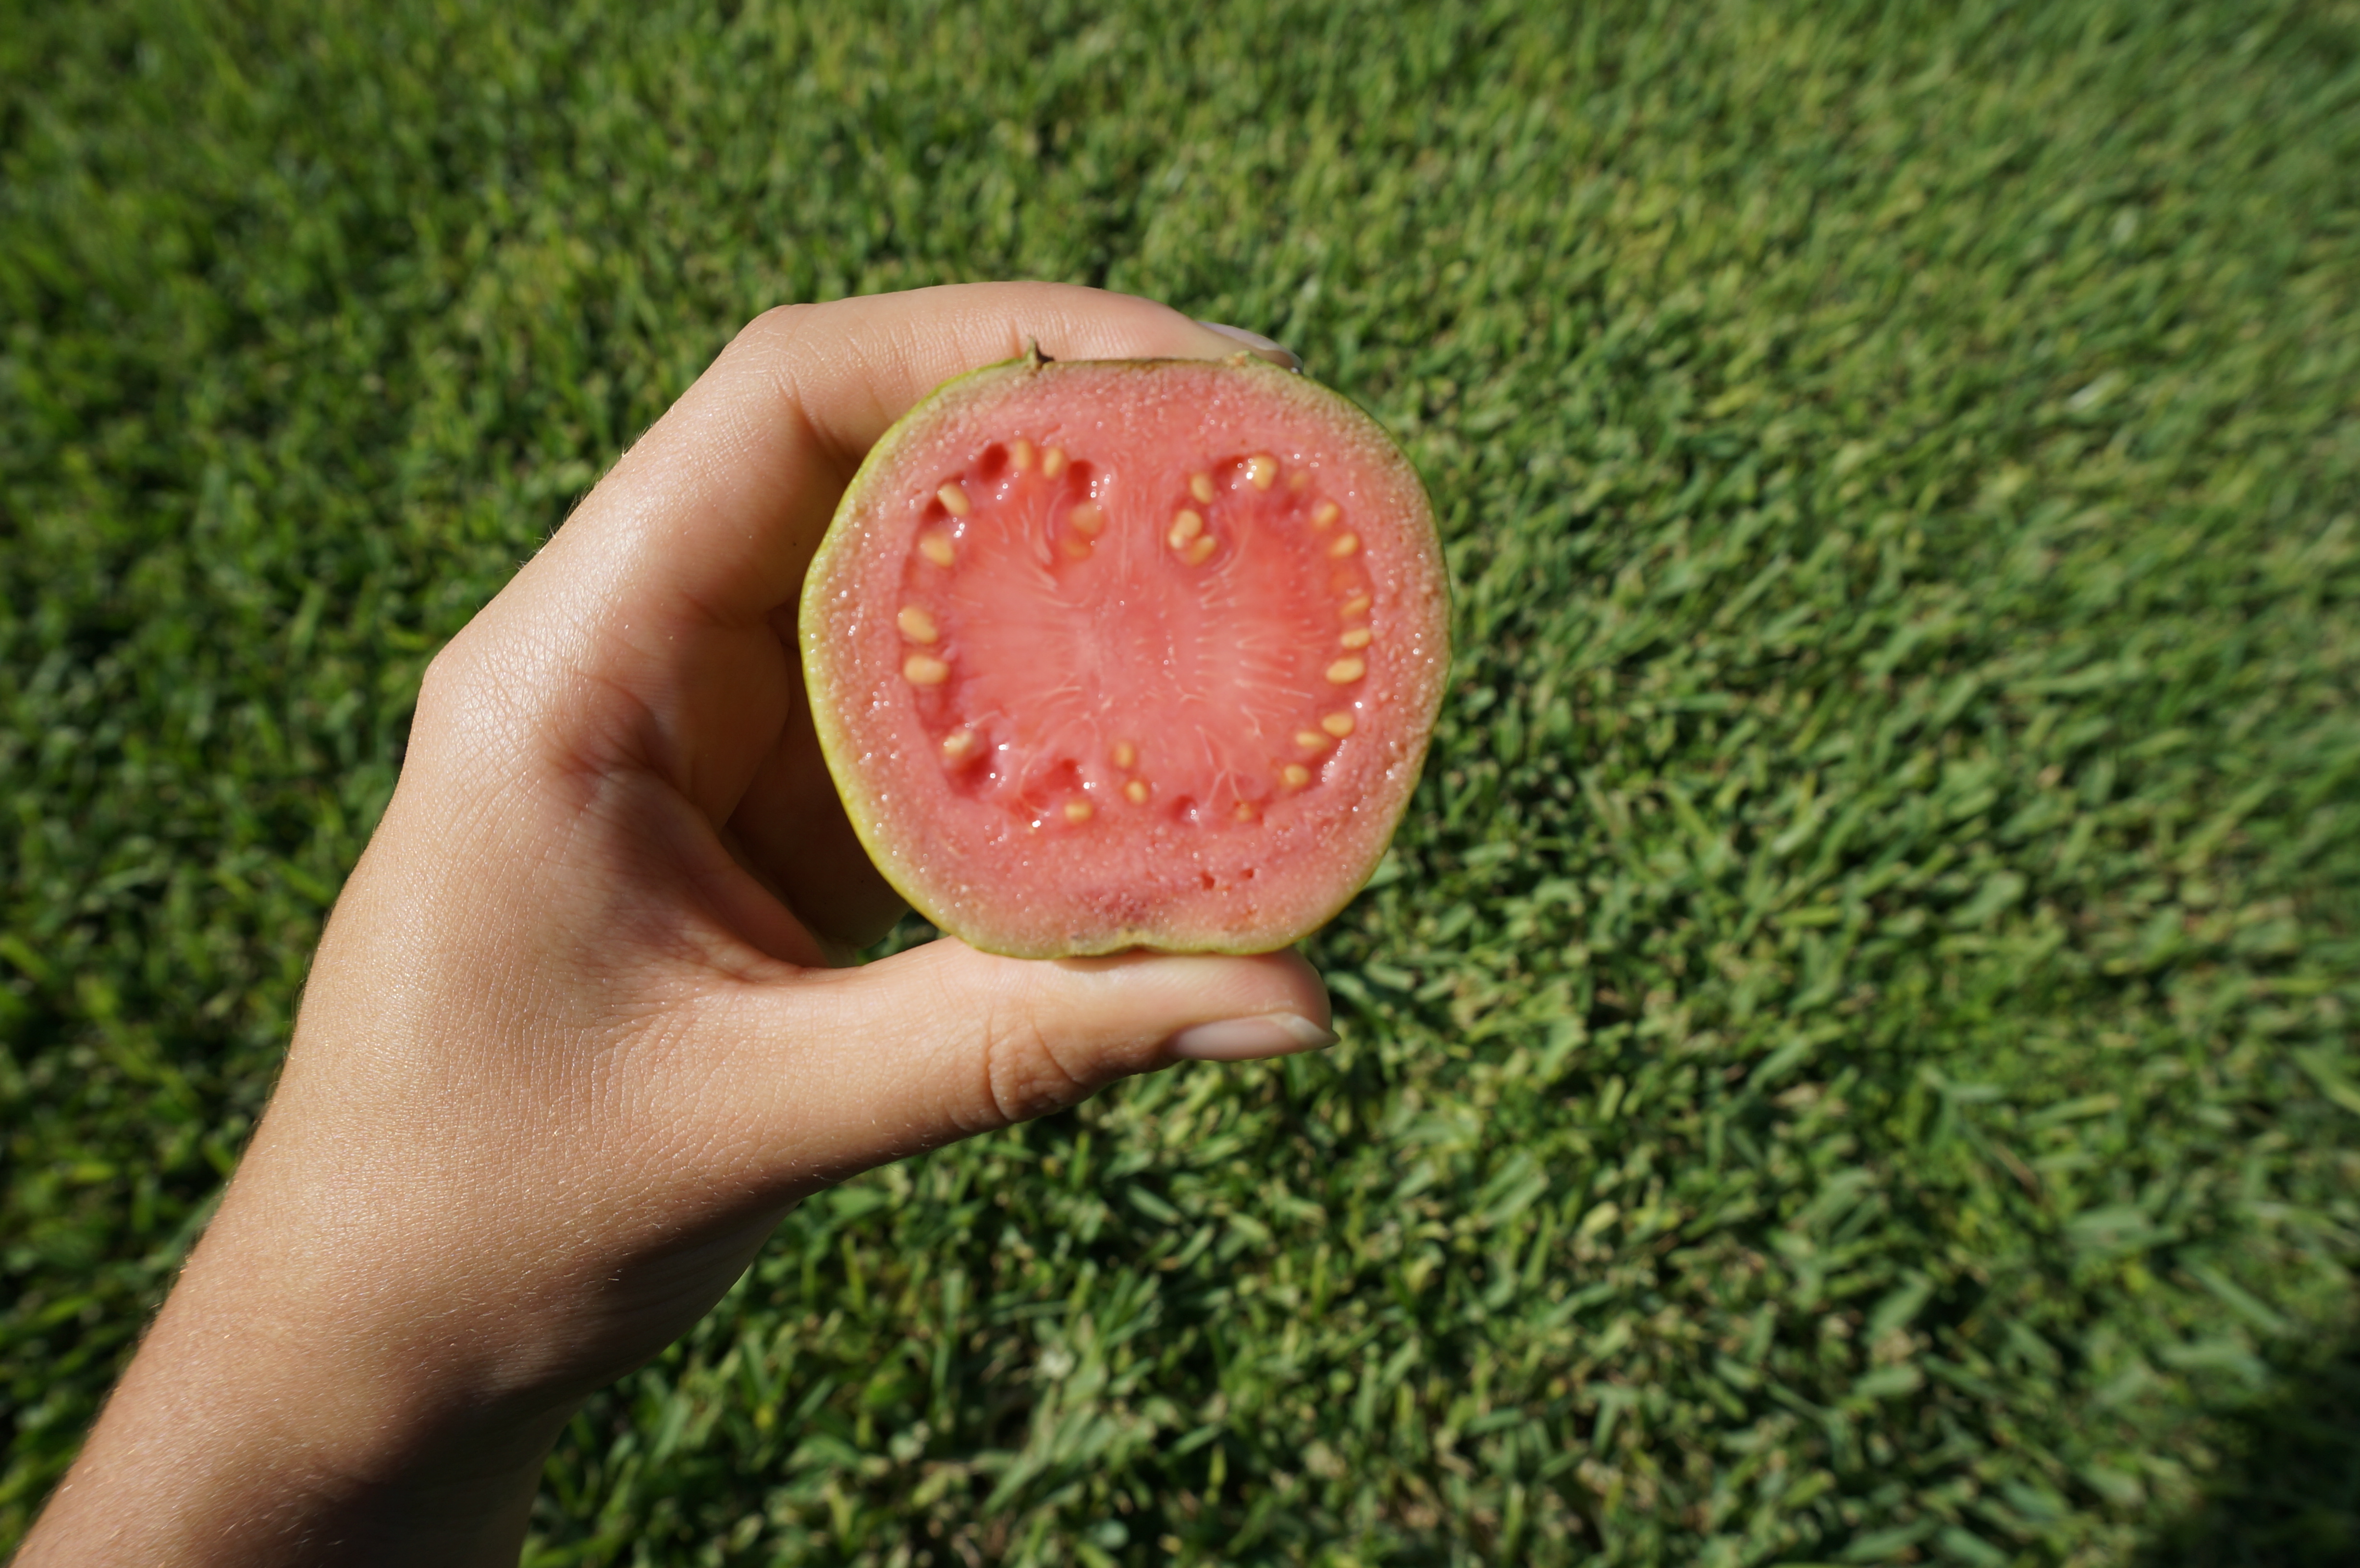 Half of a guava showing the fruits form.